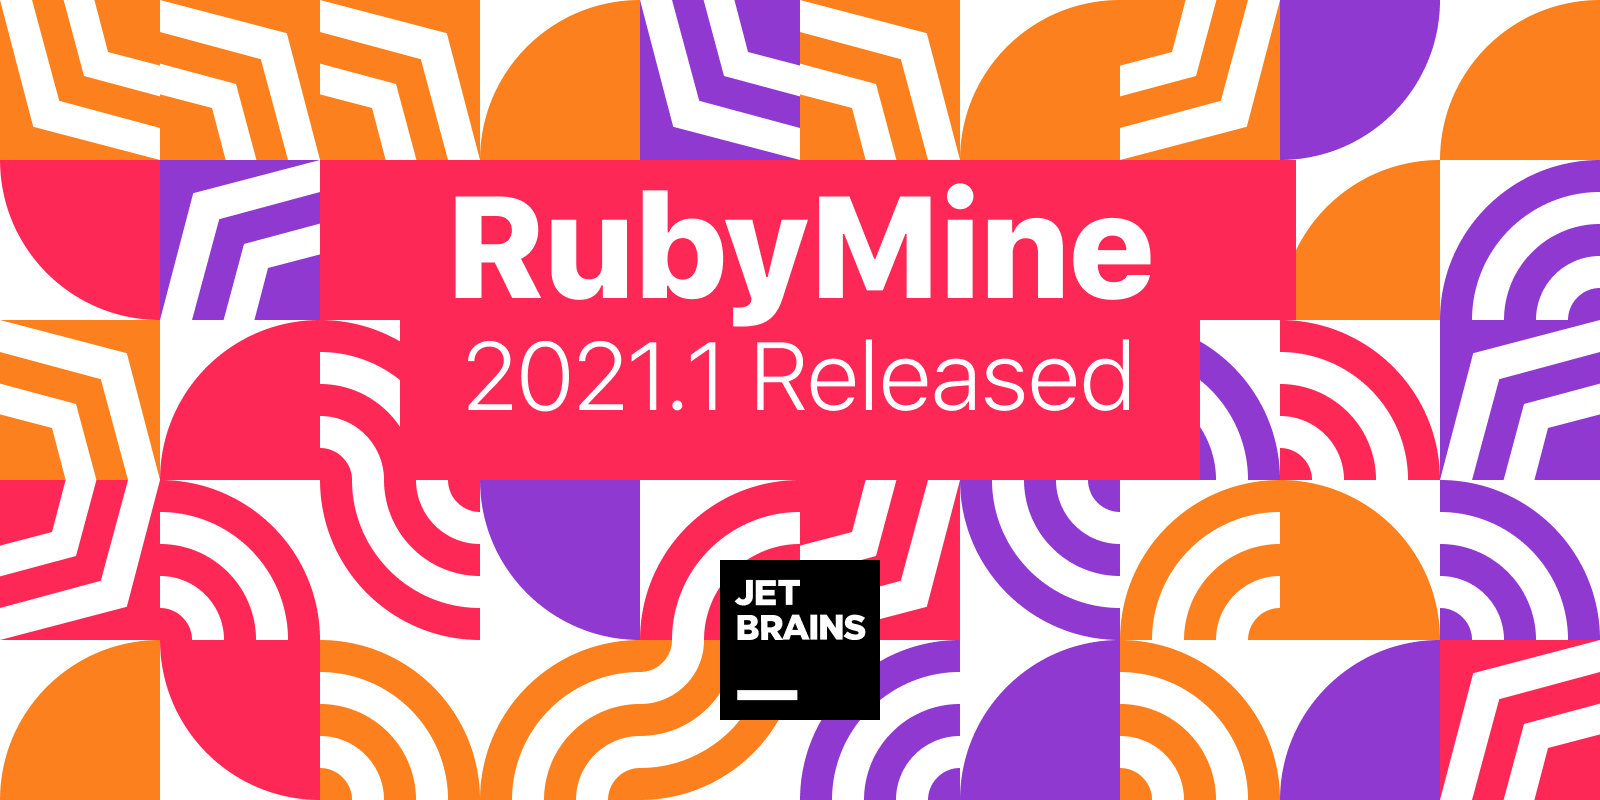 SD Times News Digest RubyMine 2021.1 Released, ShiftLeft CORE, and GrammaTech Code Sonar